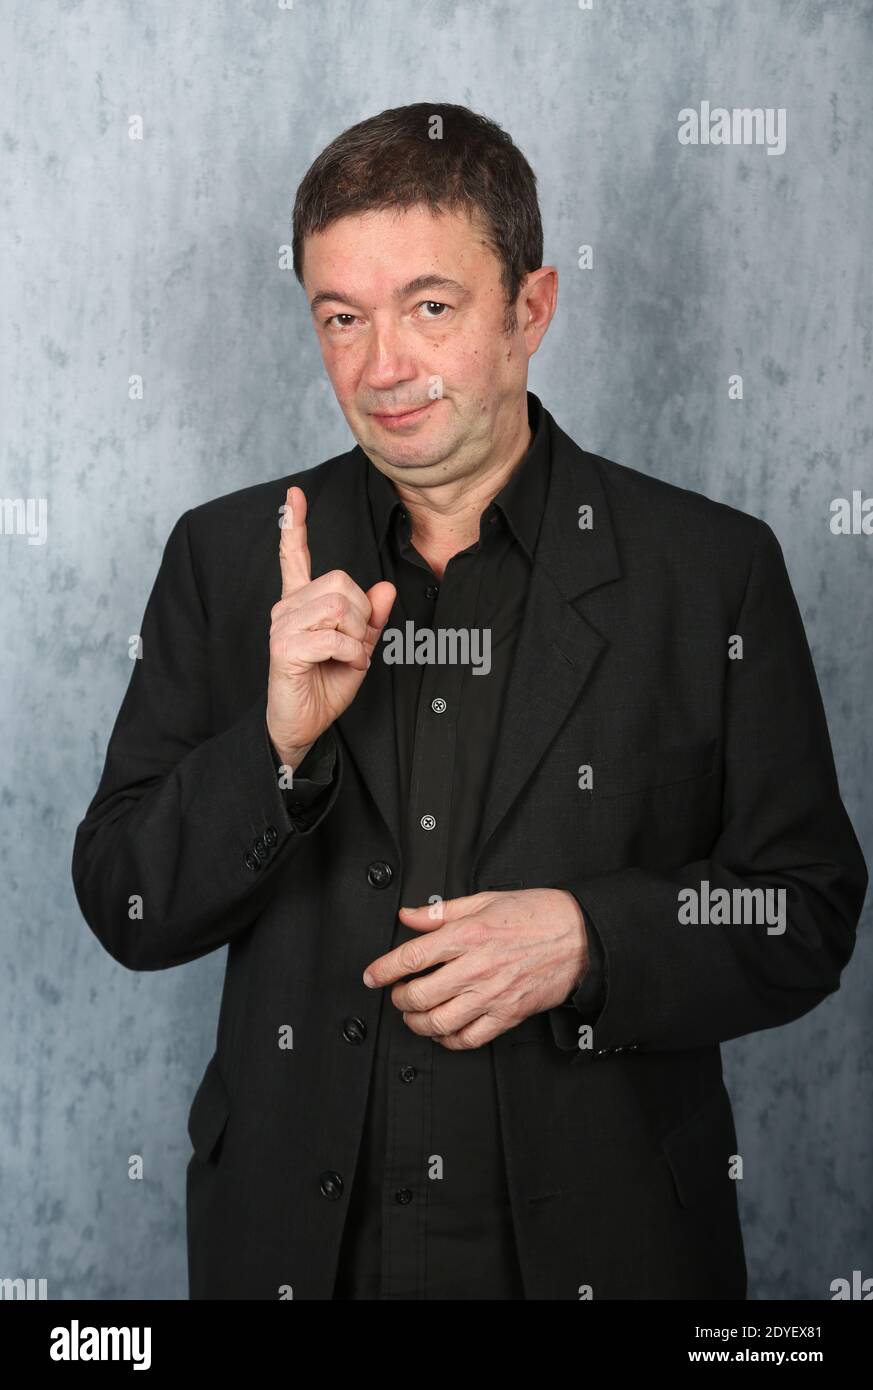 Frederic Bouraly poses for our photographer during 'Festival 2 Valenciennes' in Valenciennes, France on March 22, 2013. Photo by Denis Guignebourg/ABACAPRESS.COM Stock Photo